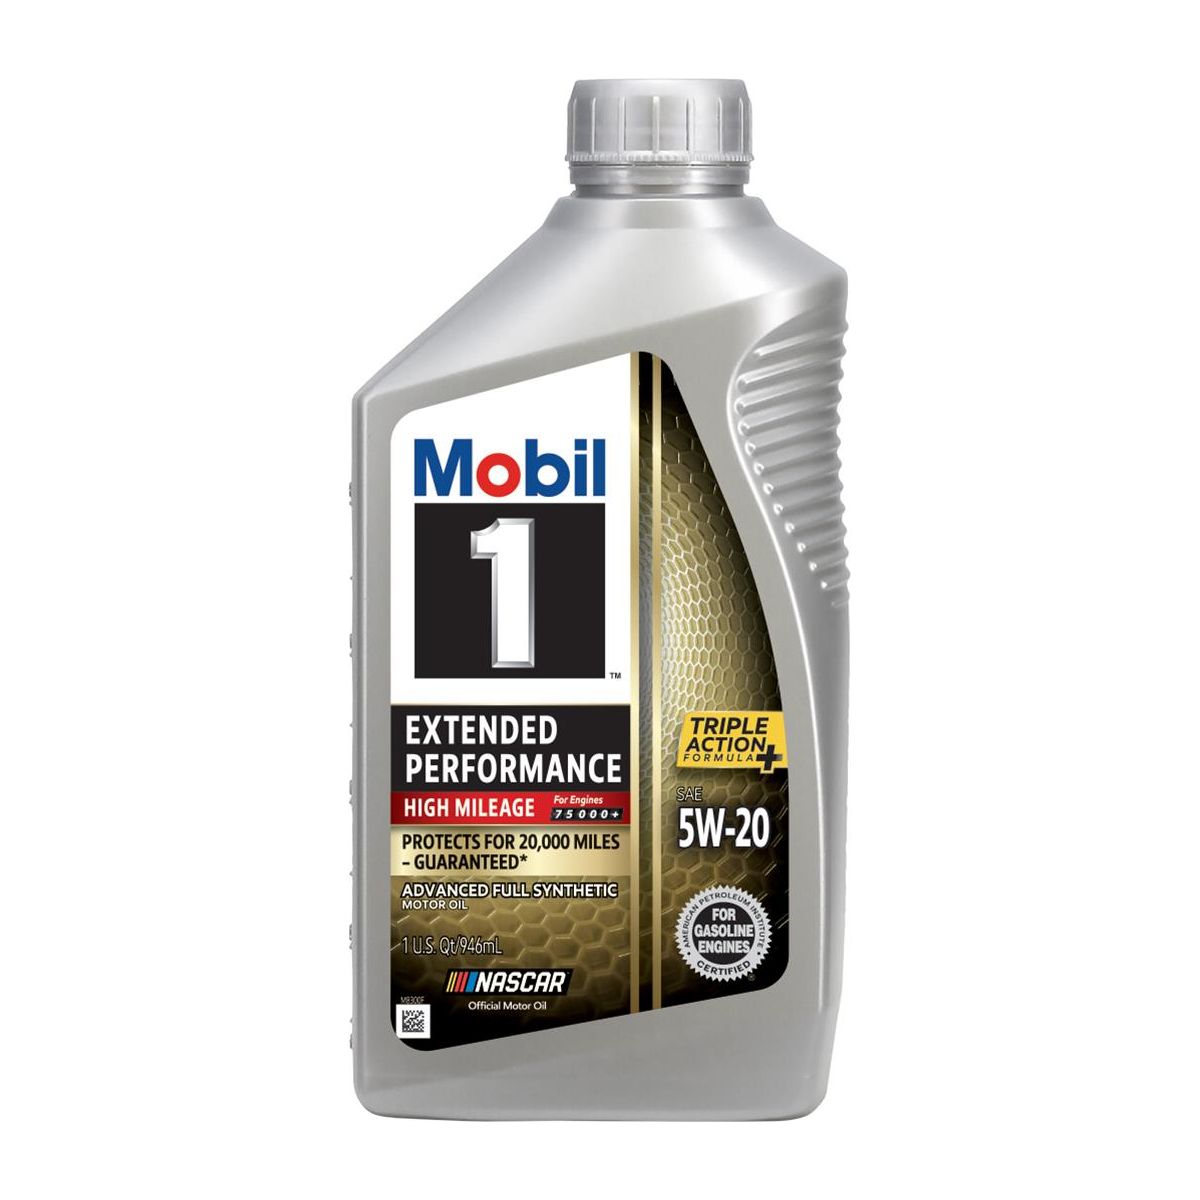 Mobil 1 Extended Performance High Mileage Motor Oil 123839